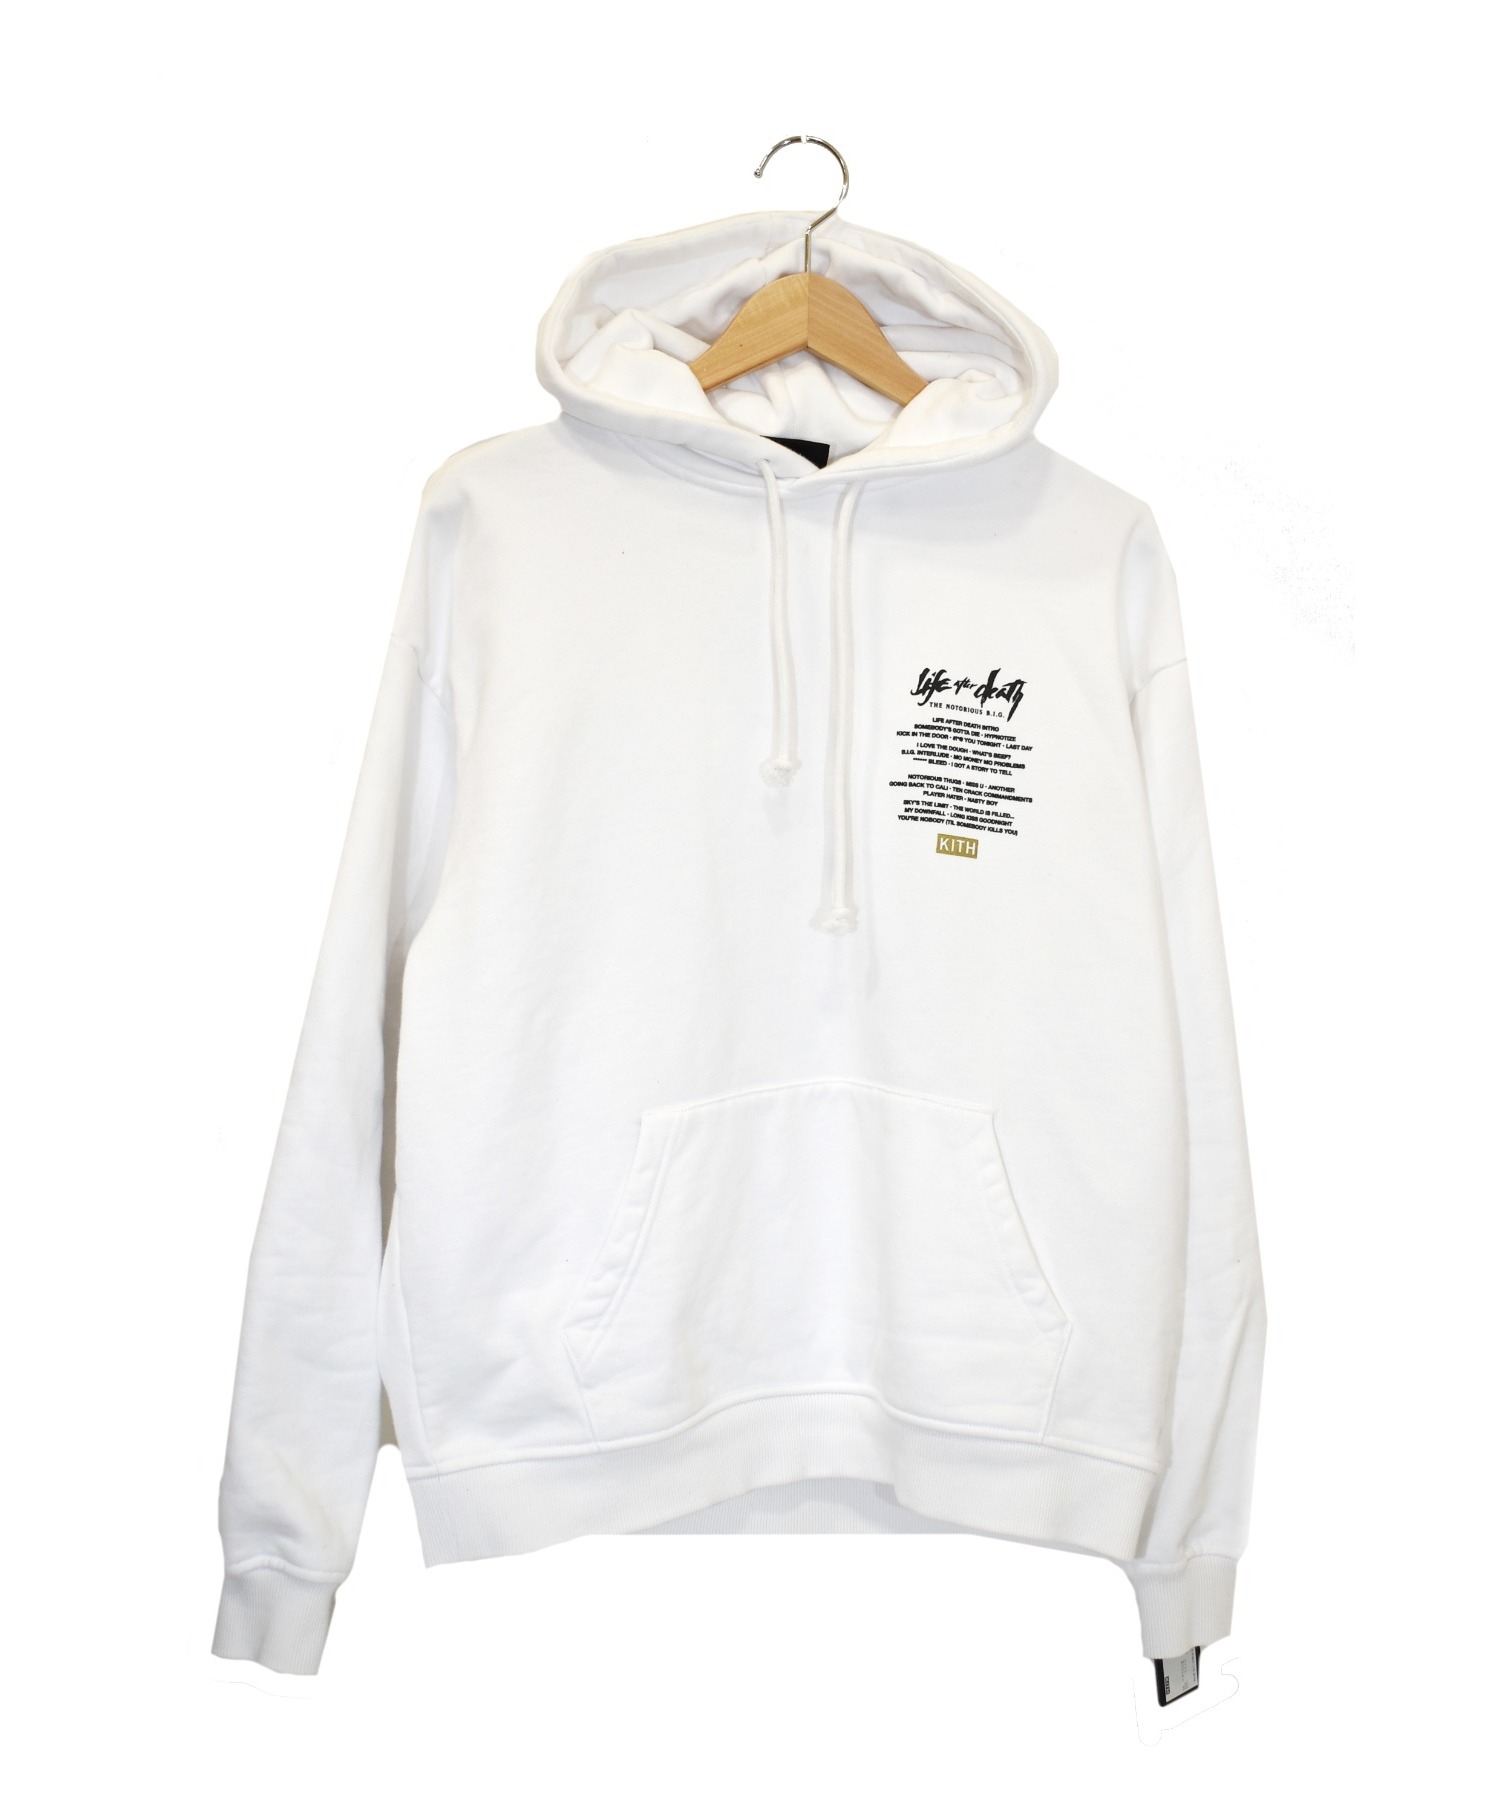 KITH × The Notorious B.I.G. (キス×ノトーリアスビッグ) プルオーバーパーカー ホワイト サイズ:M Life After  Death Hoodie